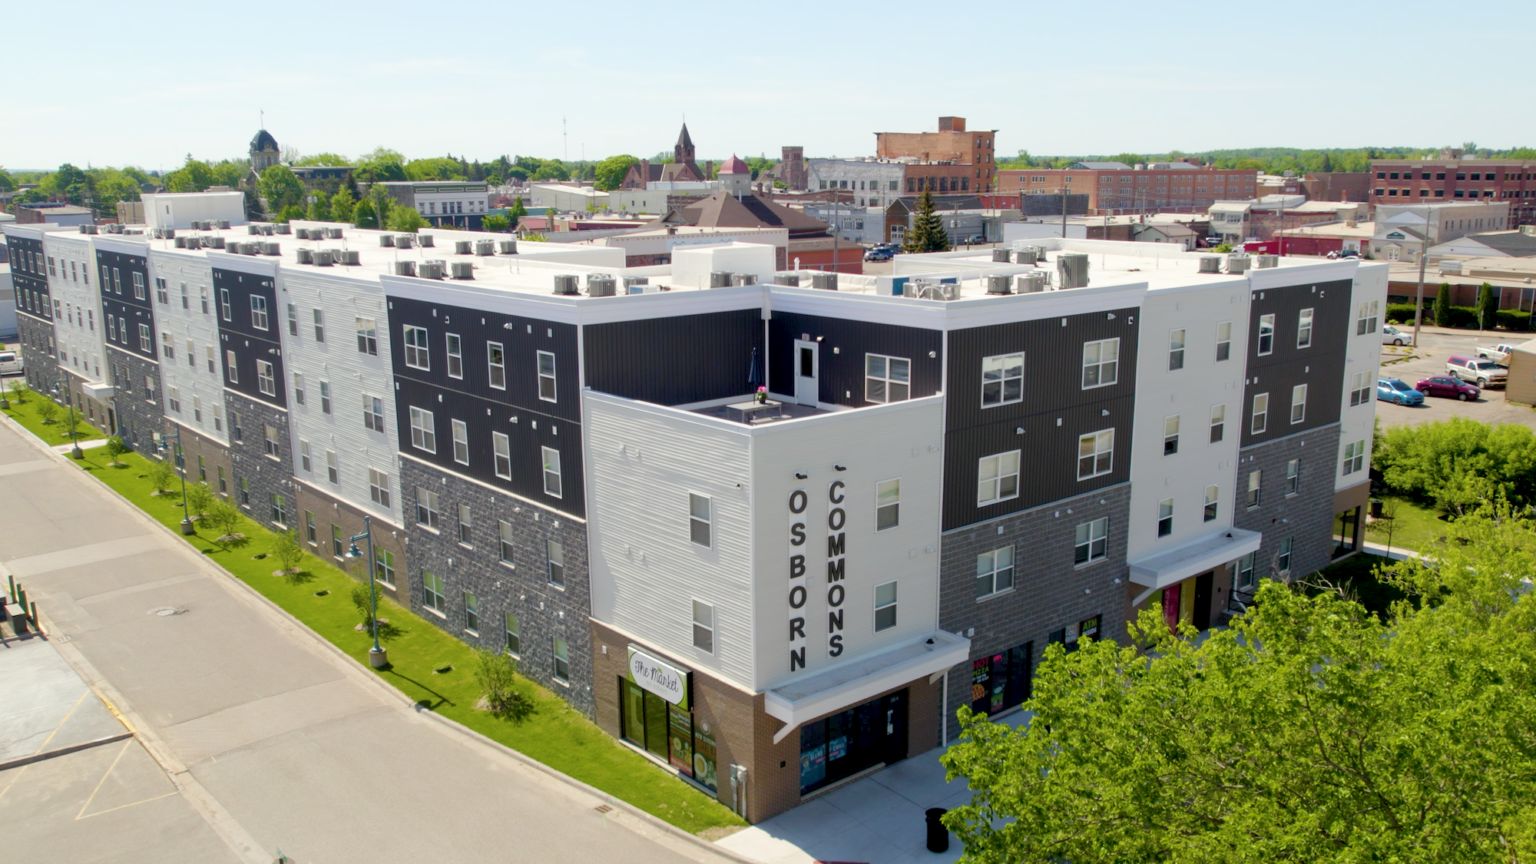 Aerial view of large, multi-story brick building reading "Osborn Commons" on its side.